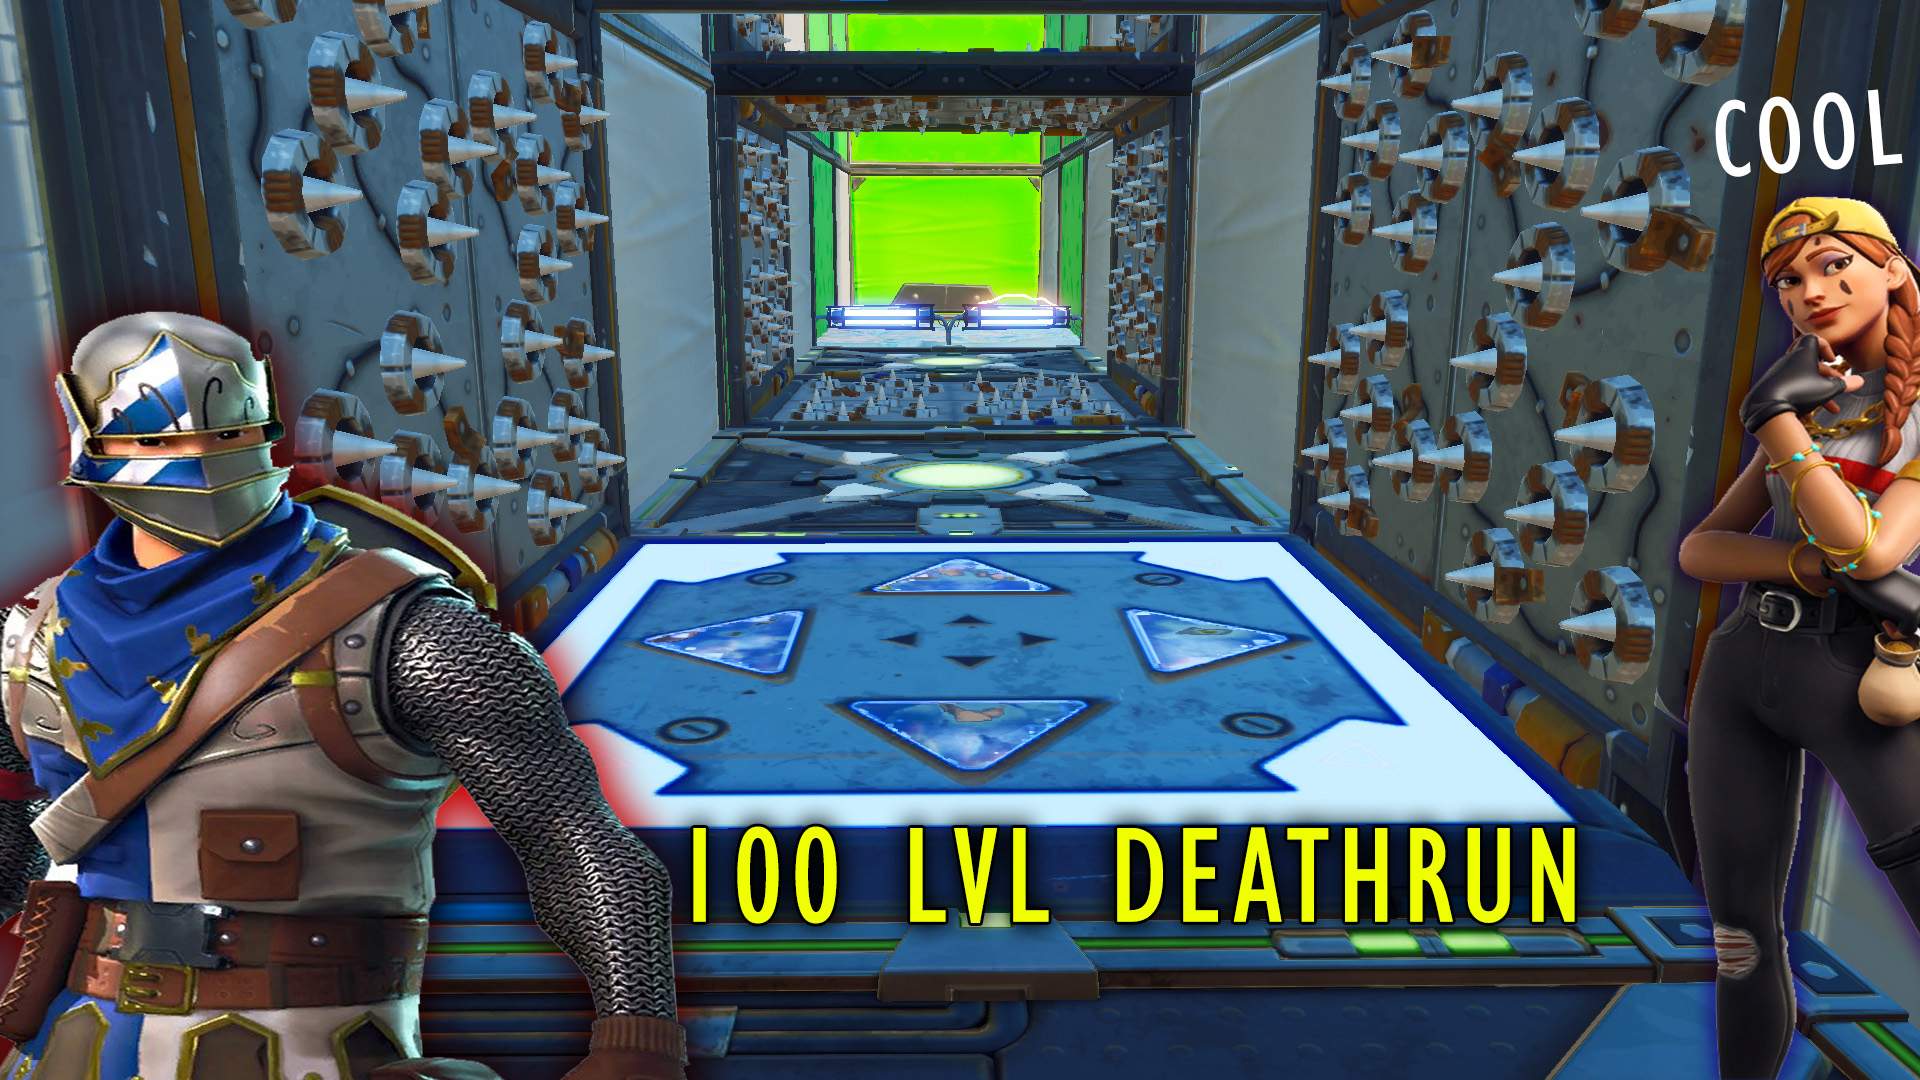 YES,IT IS THE *EASY* 100 LEVEL DEATHRUN